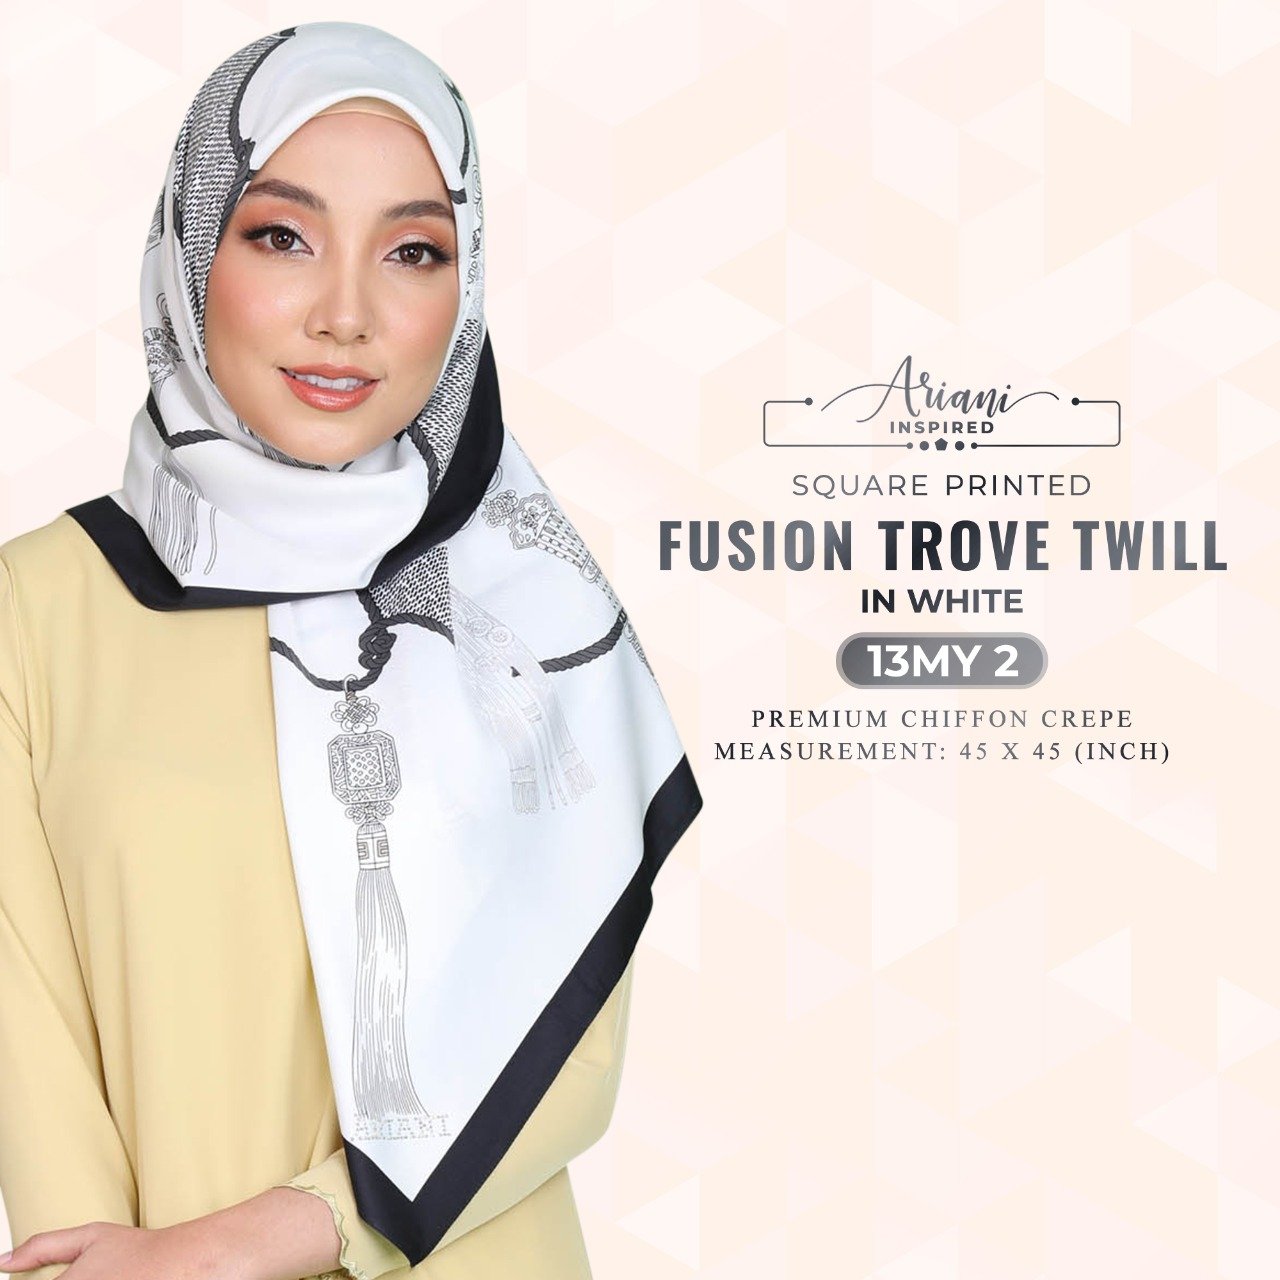 Ariani Inspired Fusion Trove Twill Printed SQ Collection